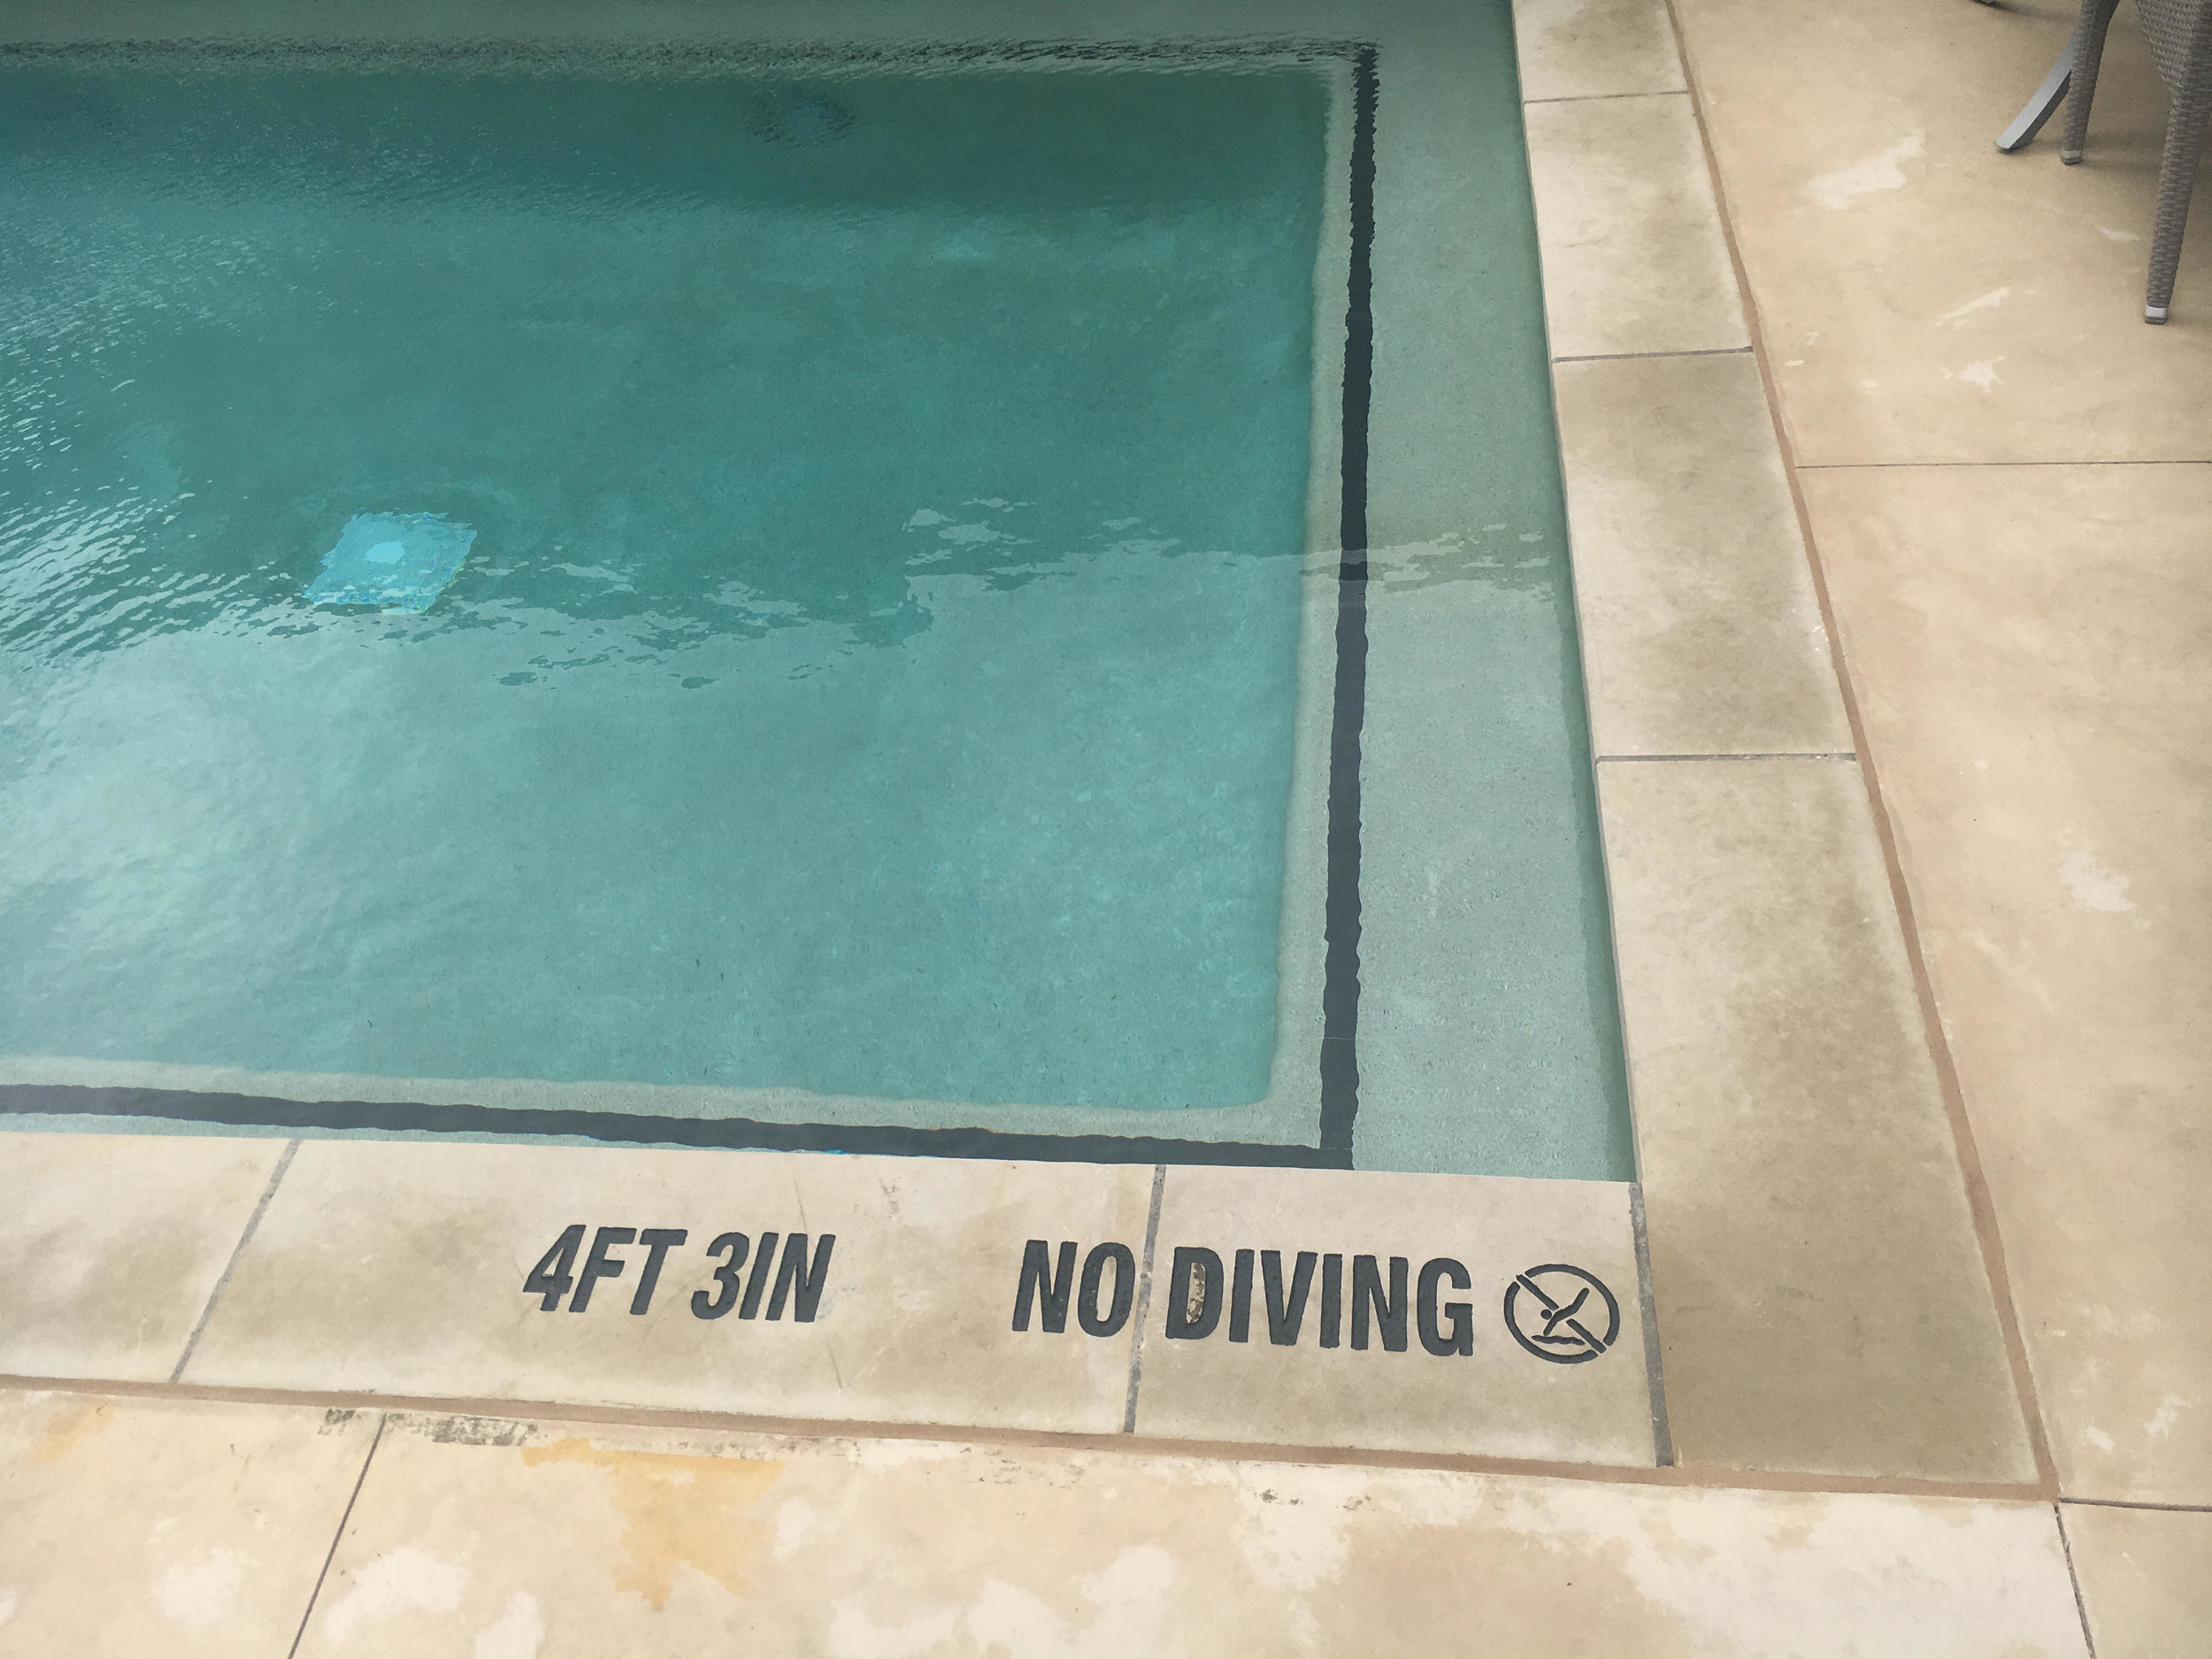 etched pool depth markers